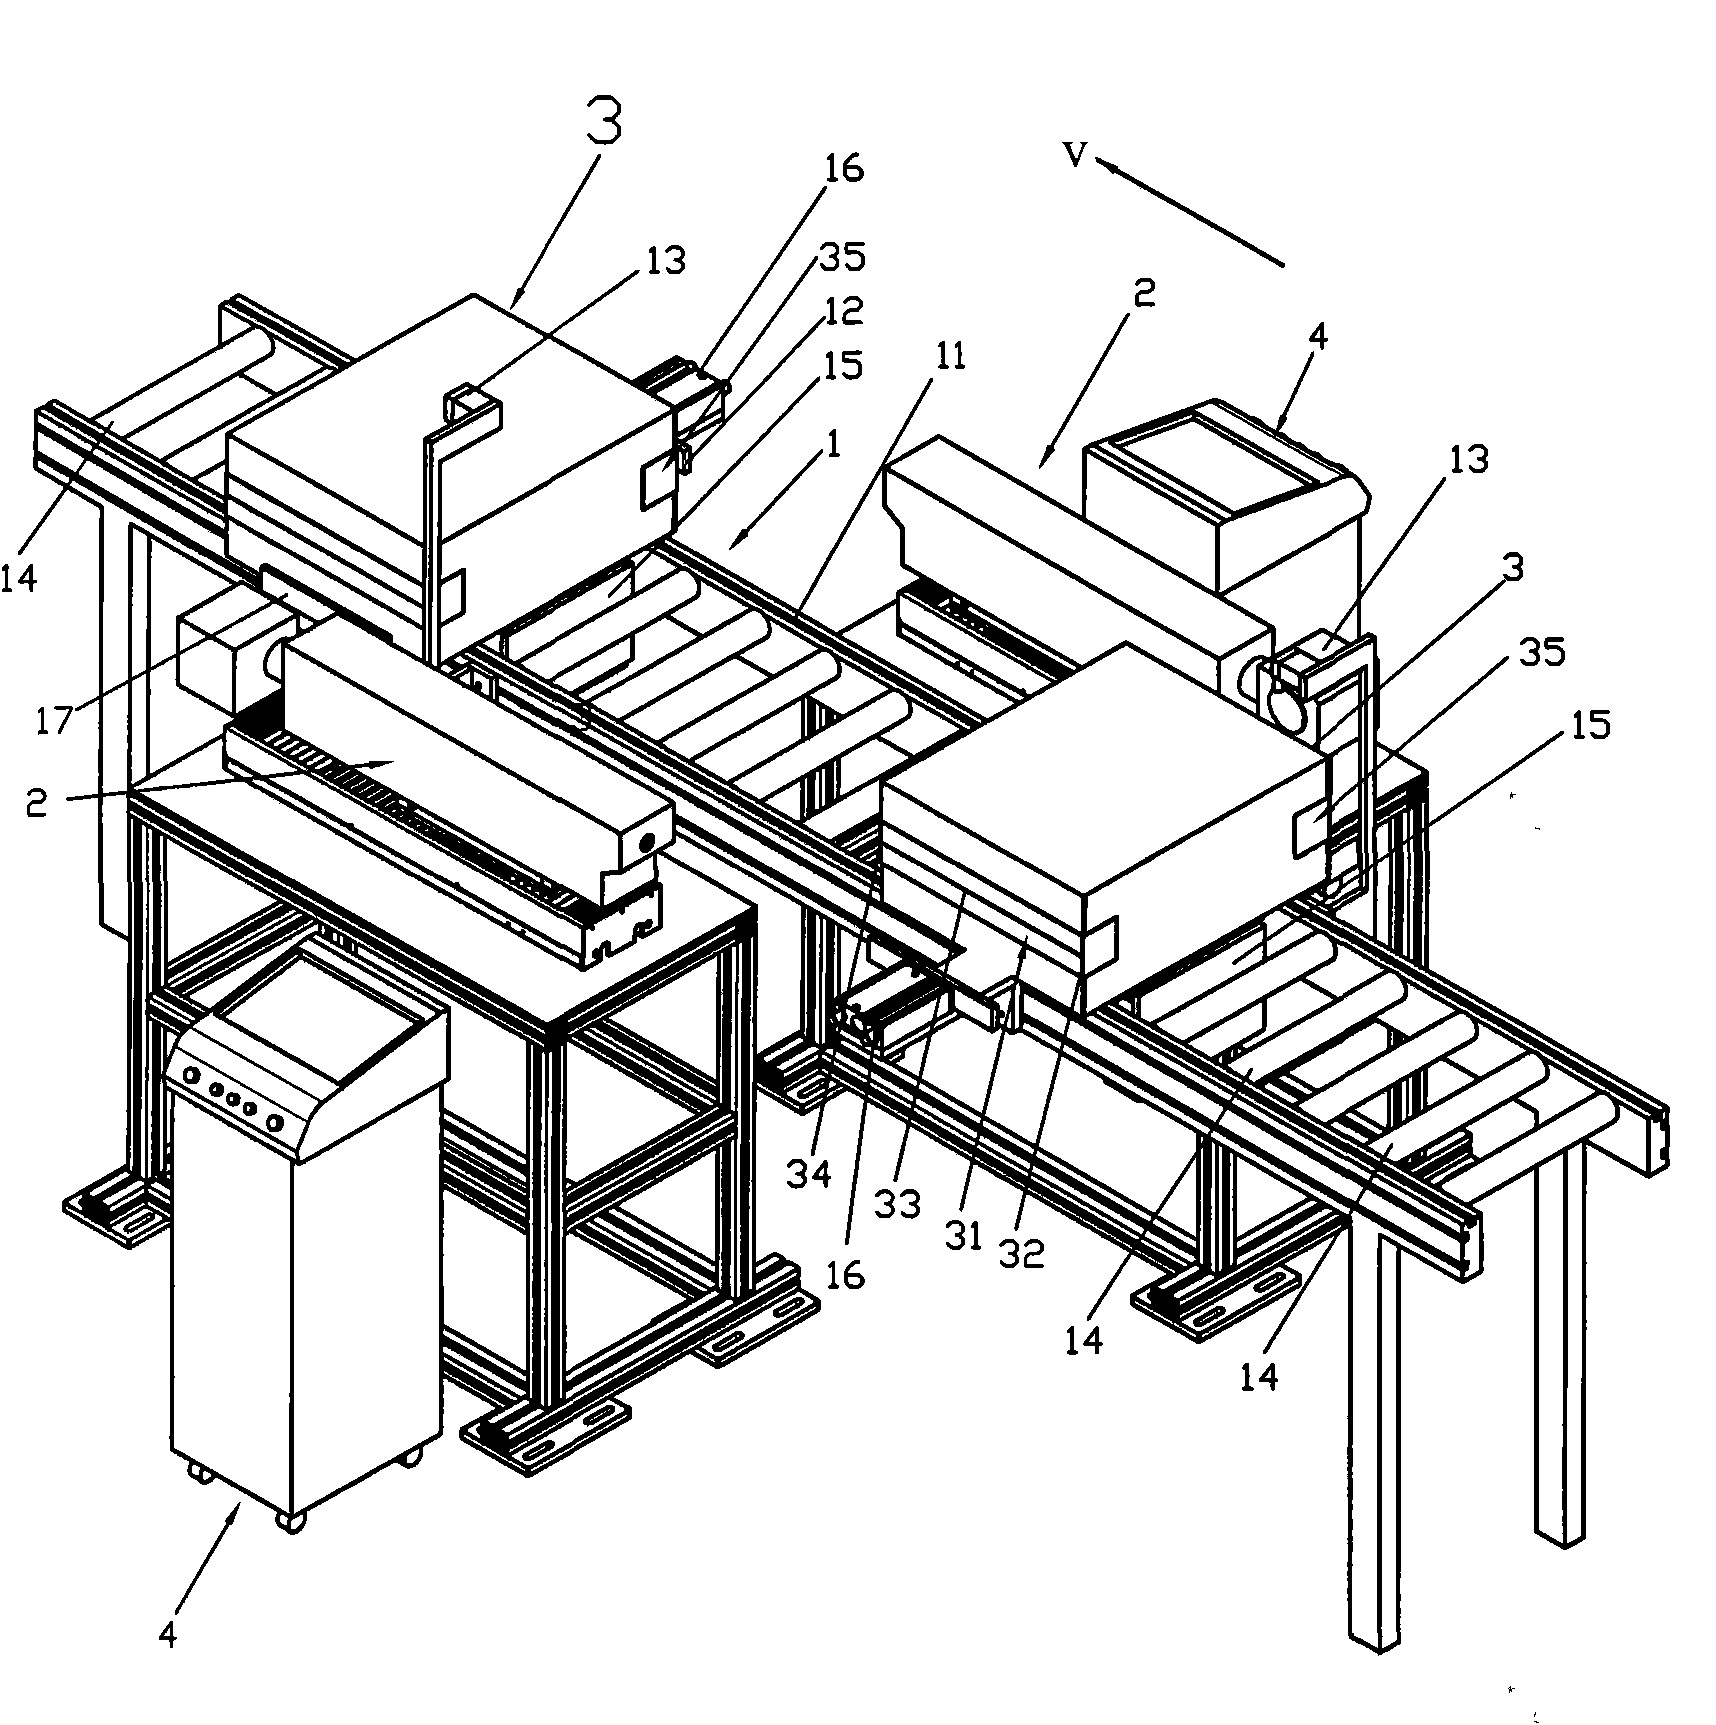 Method for opening box by cutting packing tape with laser